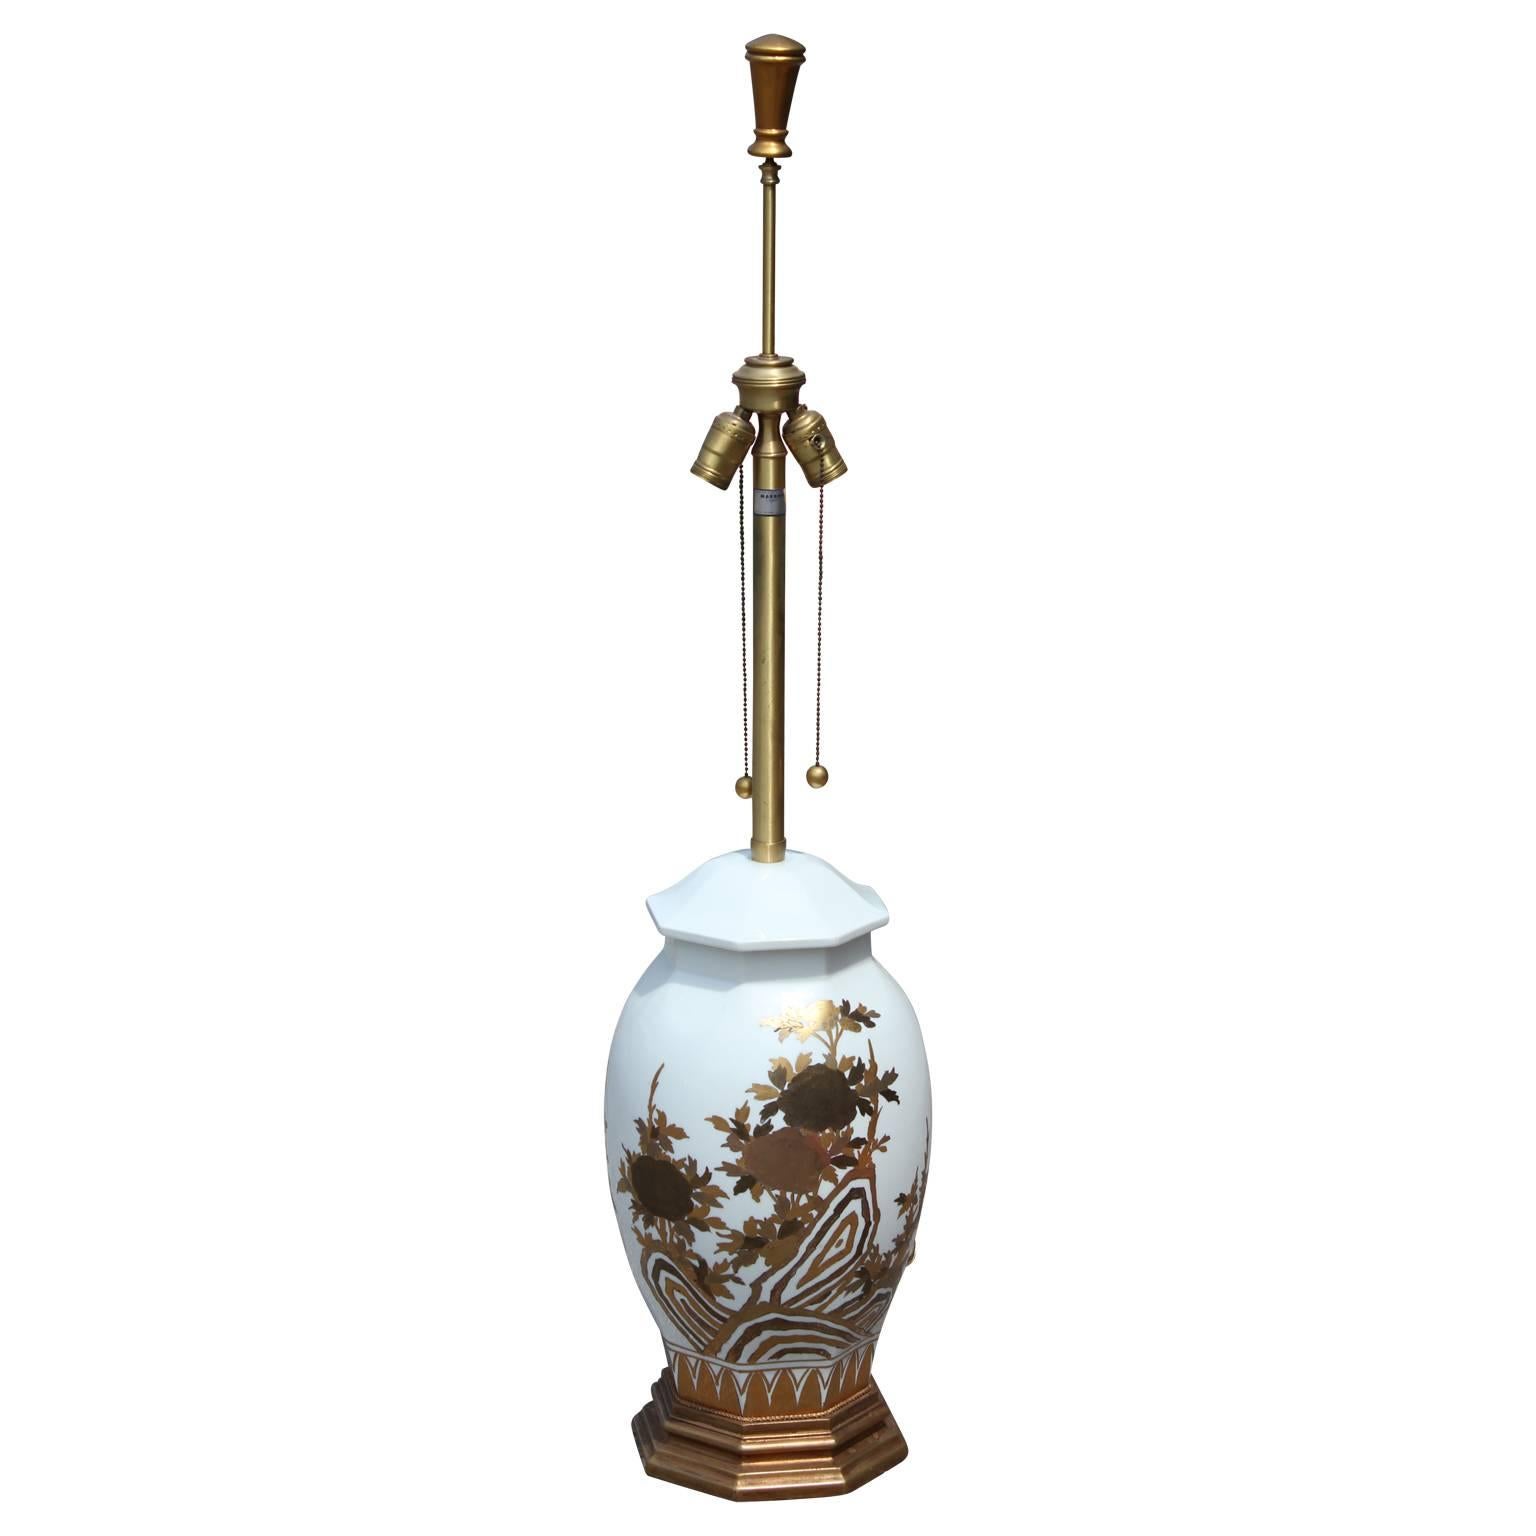 Pair of stunning large white ceramic lamps with gold floral detailing by The Marbro Lamp Company.